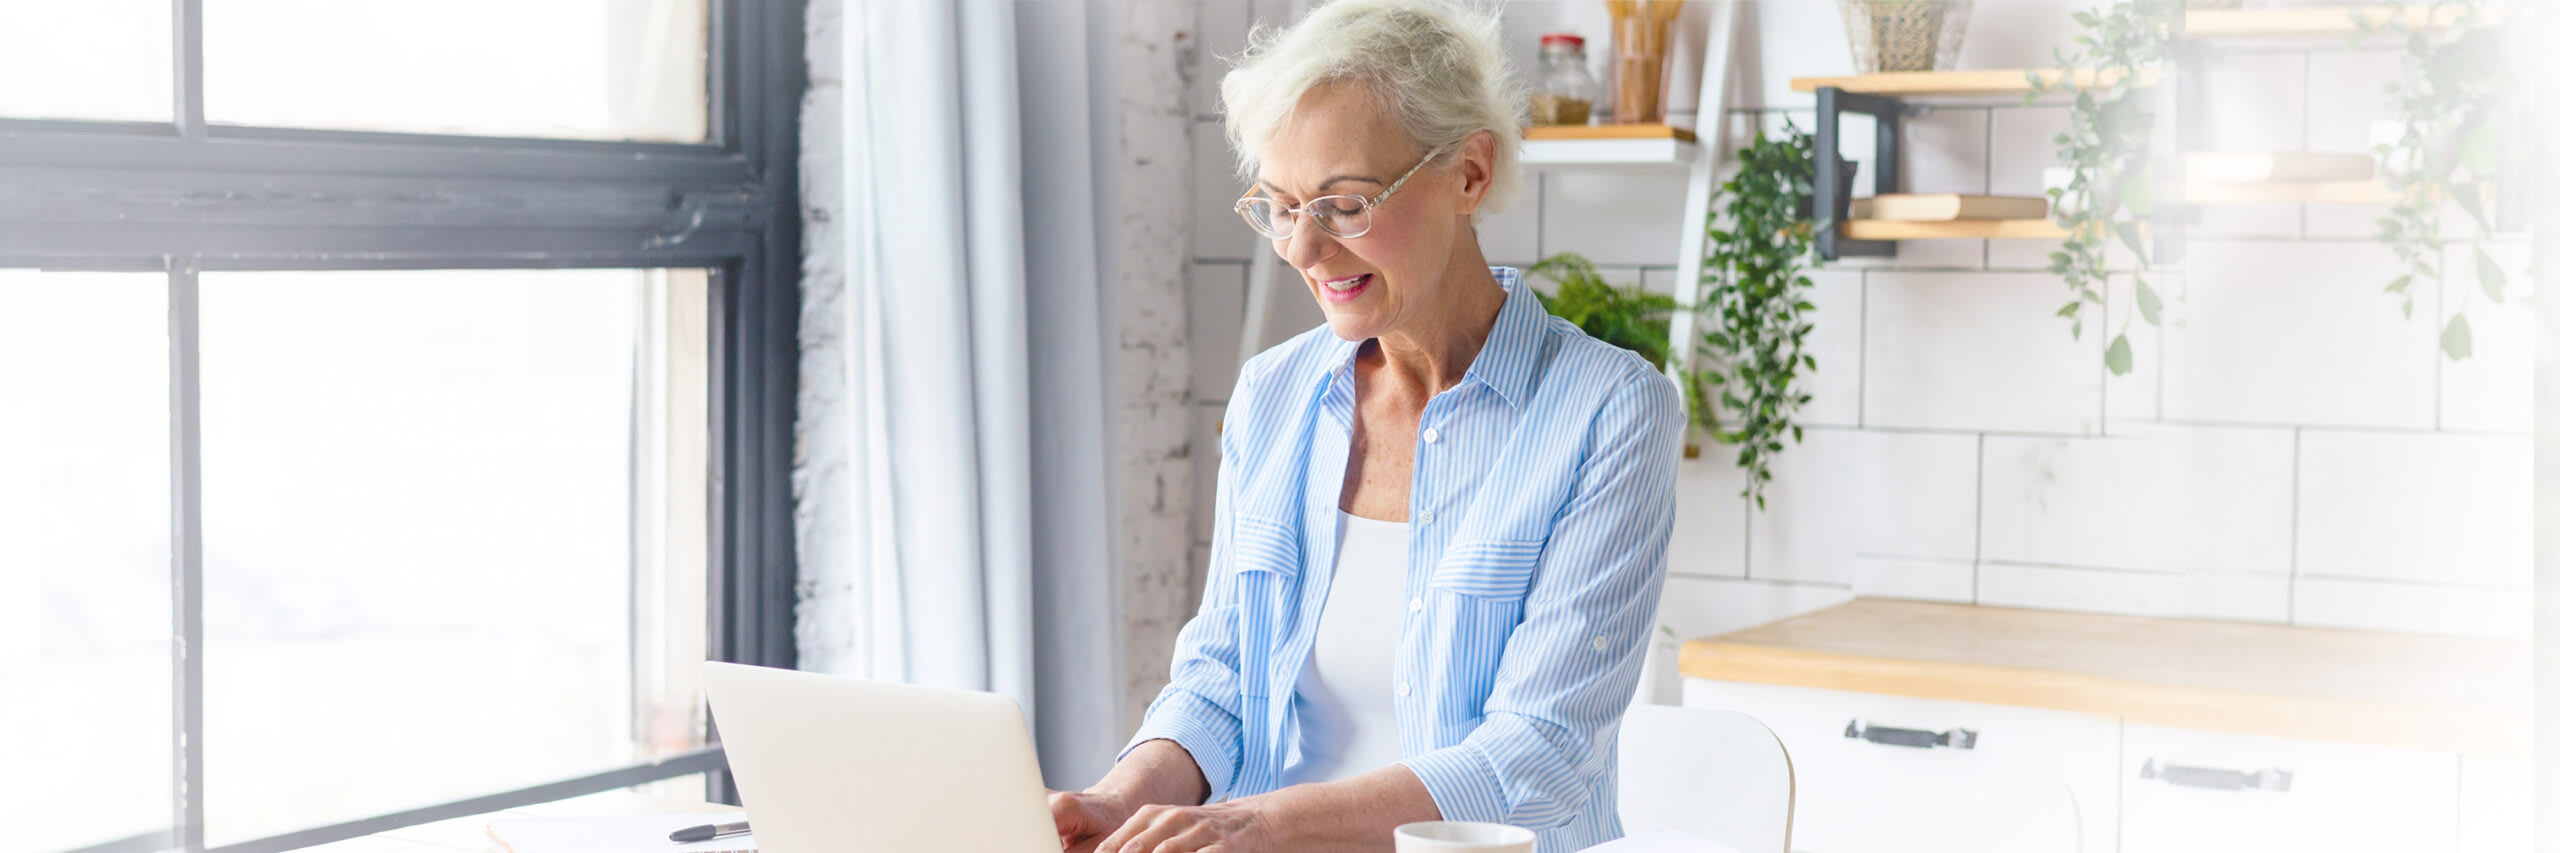 A senior woman at home using a laptop